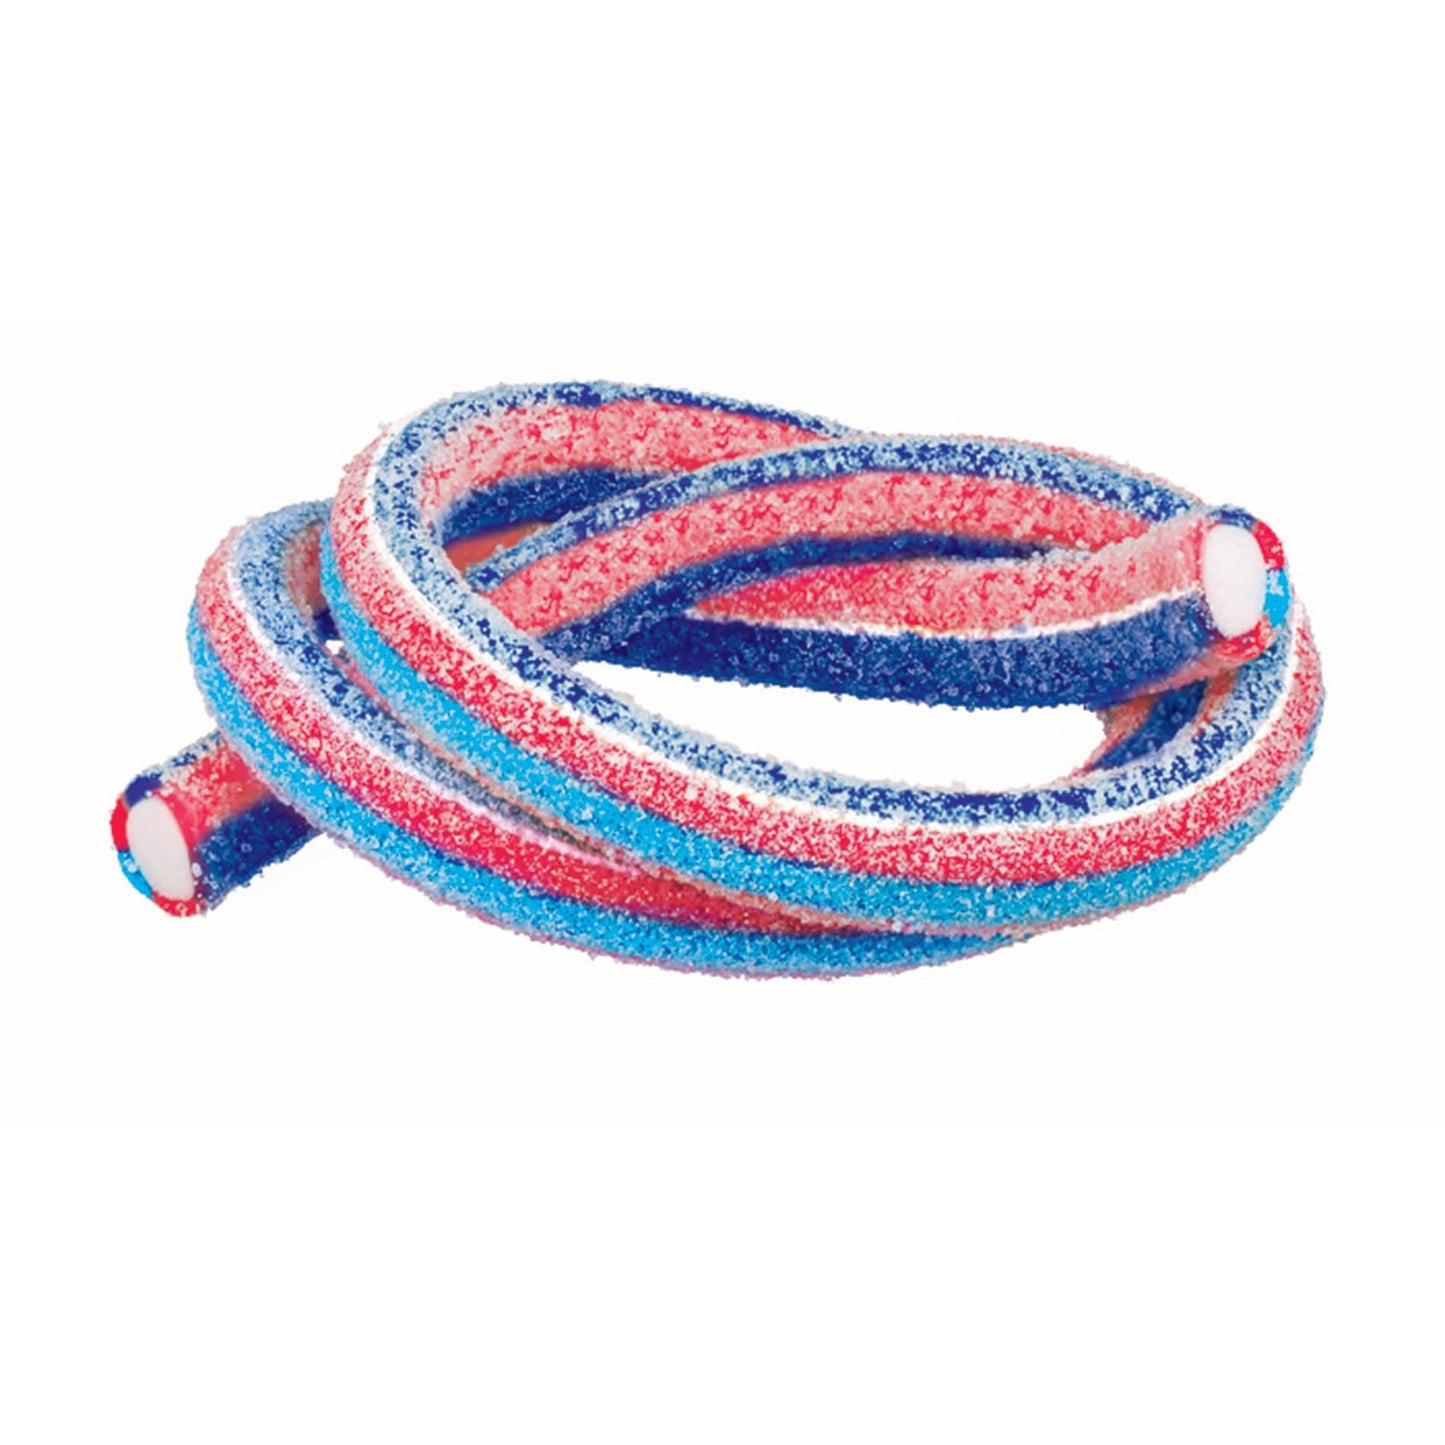 Novelty Concessions Gummy Rope FIZZY BERRY / 1 Pack (30 pieces) Meeega Cables European Chewy Rope Candy - Box of 30 individually wrapped Meeega Cables, each over 2-feet long cups with lids and straws